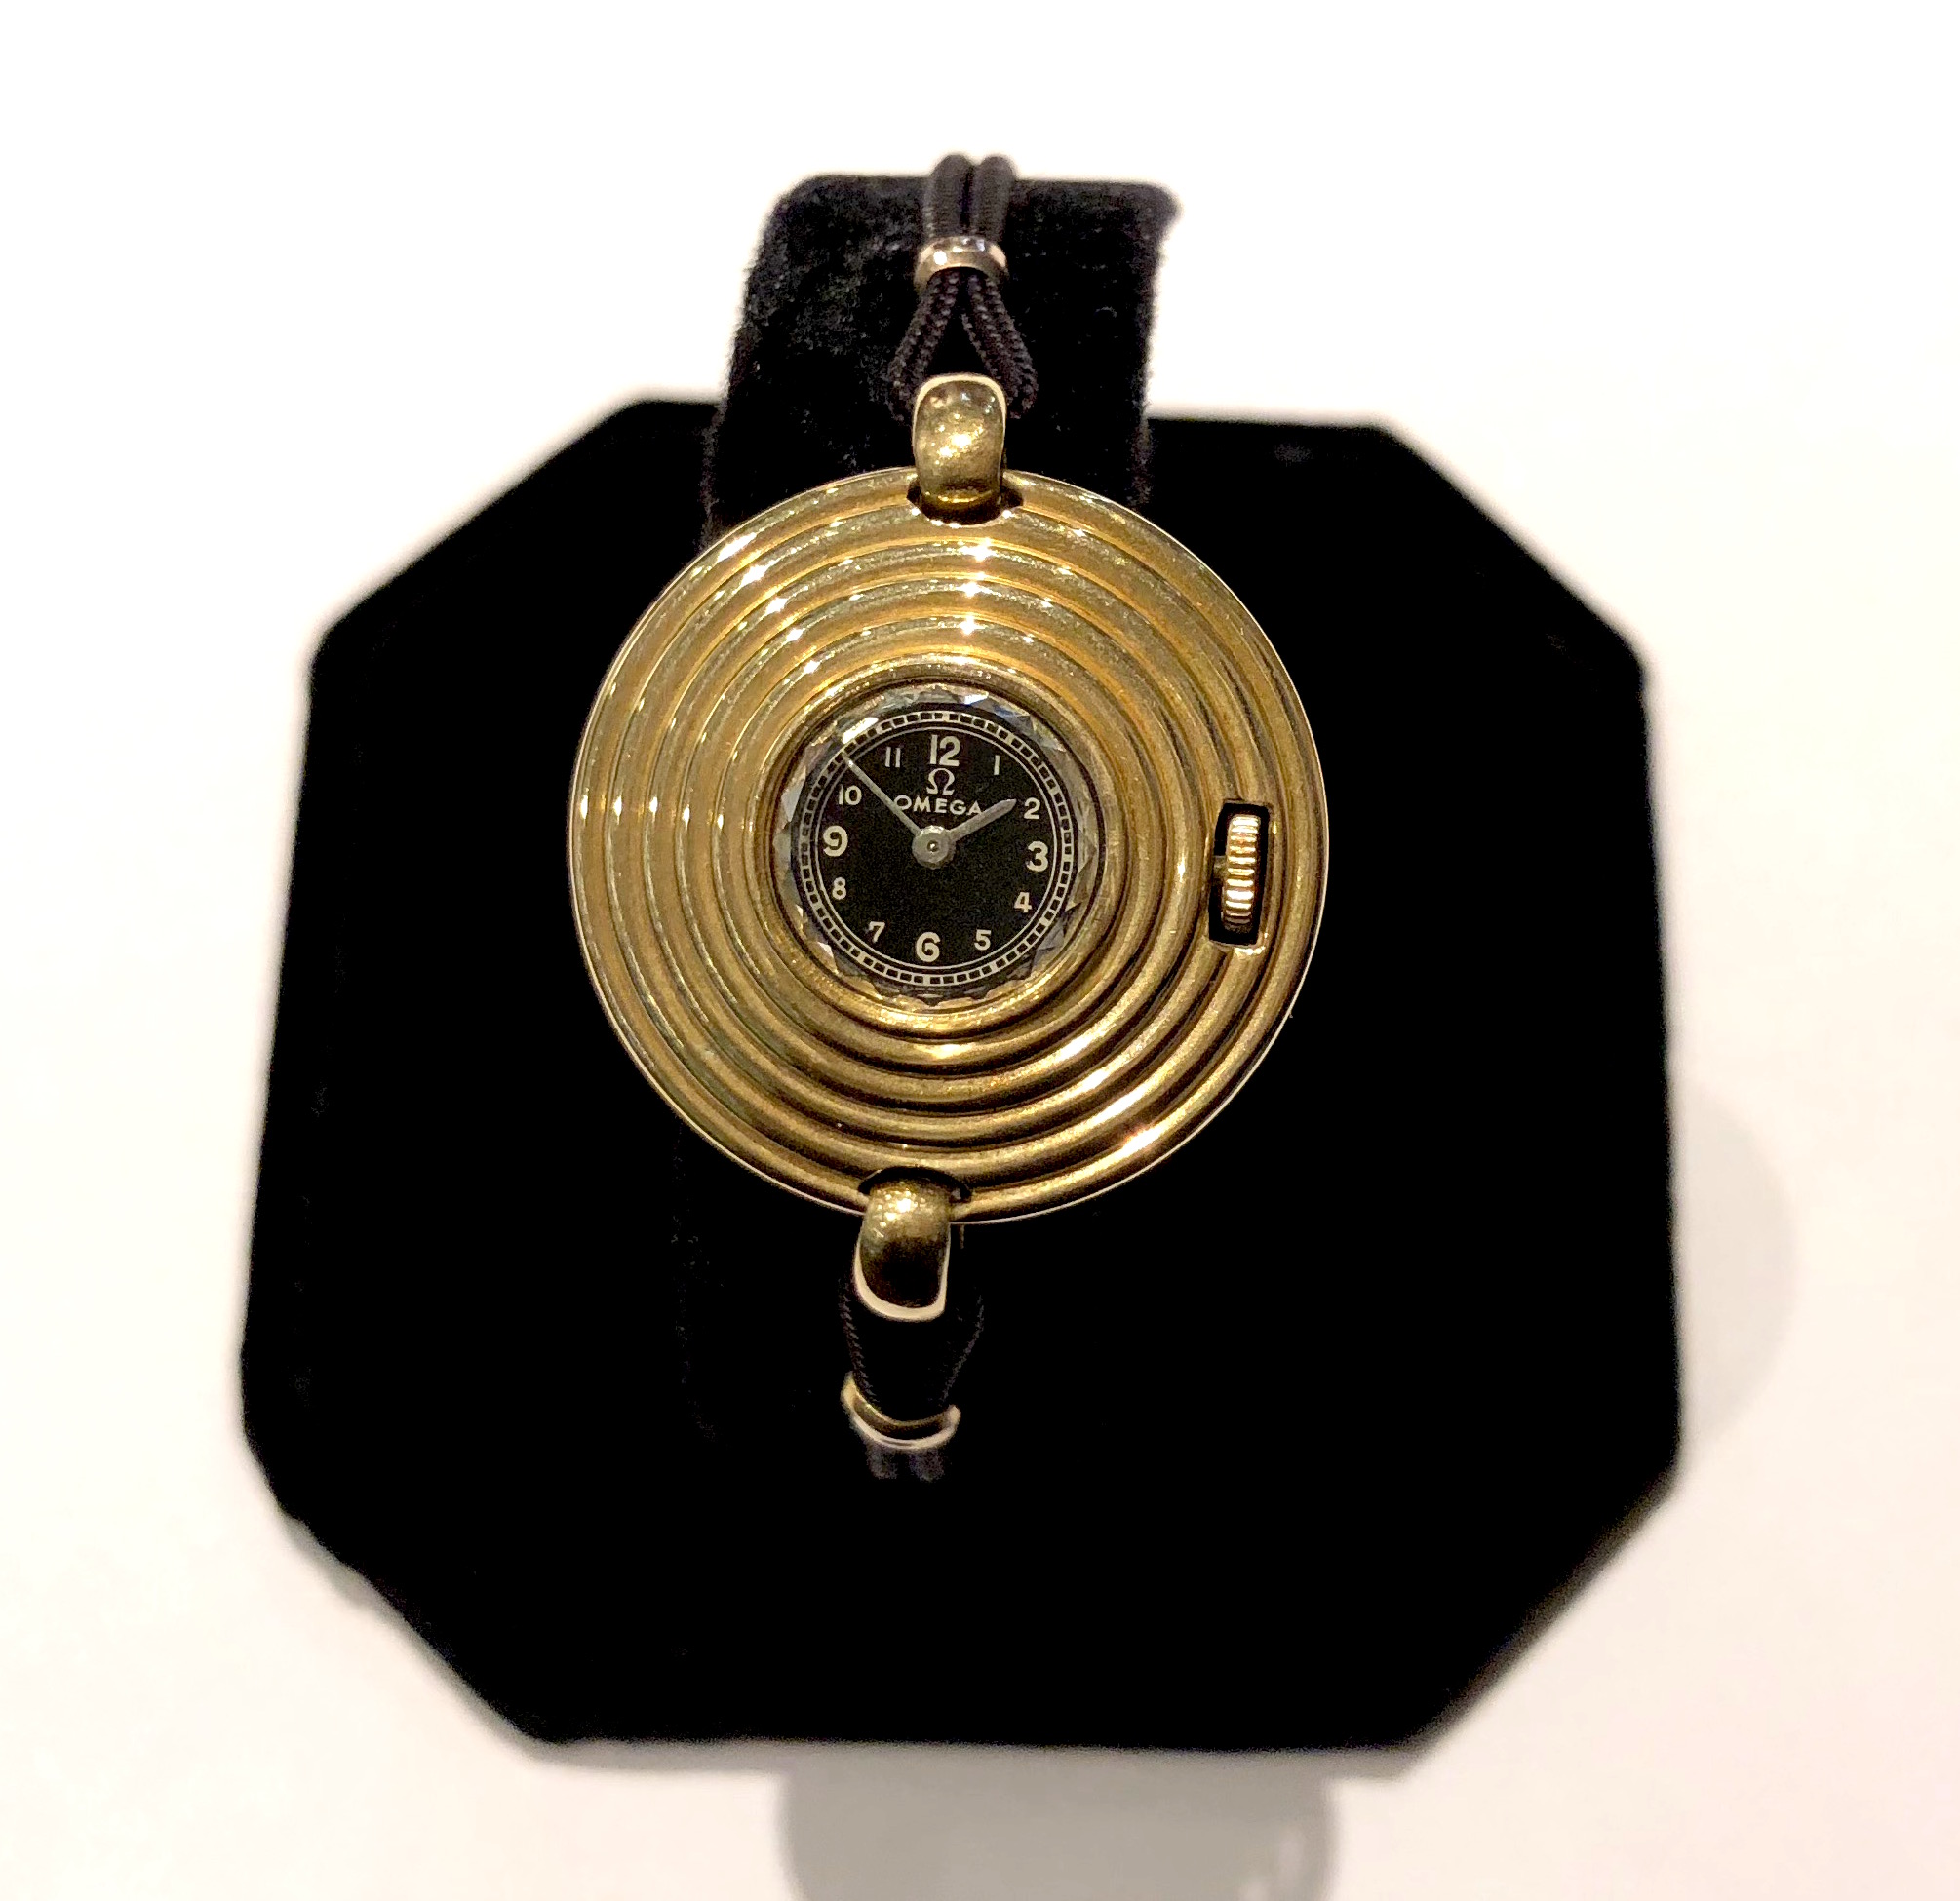 Omega Swiss Art Deco “concentric ring” round face watch, 18K gold with a big jeweled round crystal face and black strap band, signed, c. 1930’s